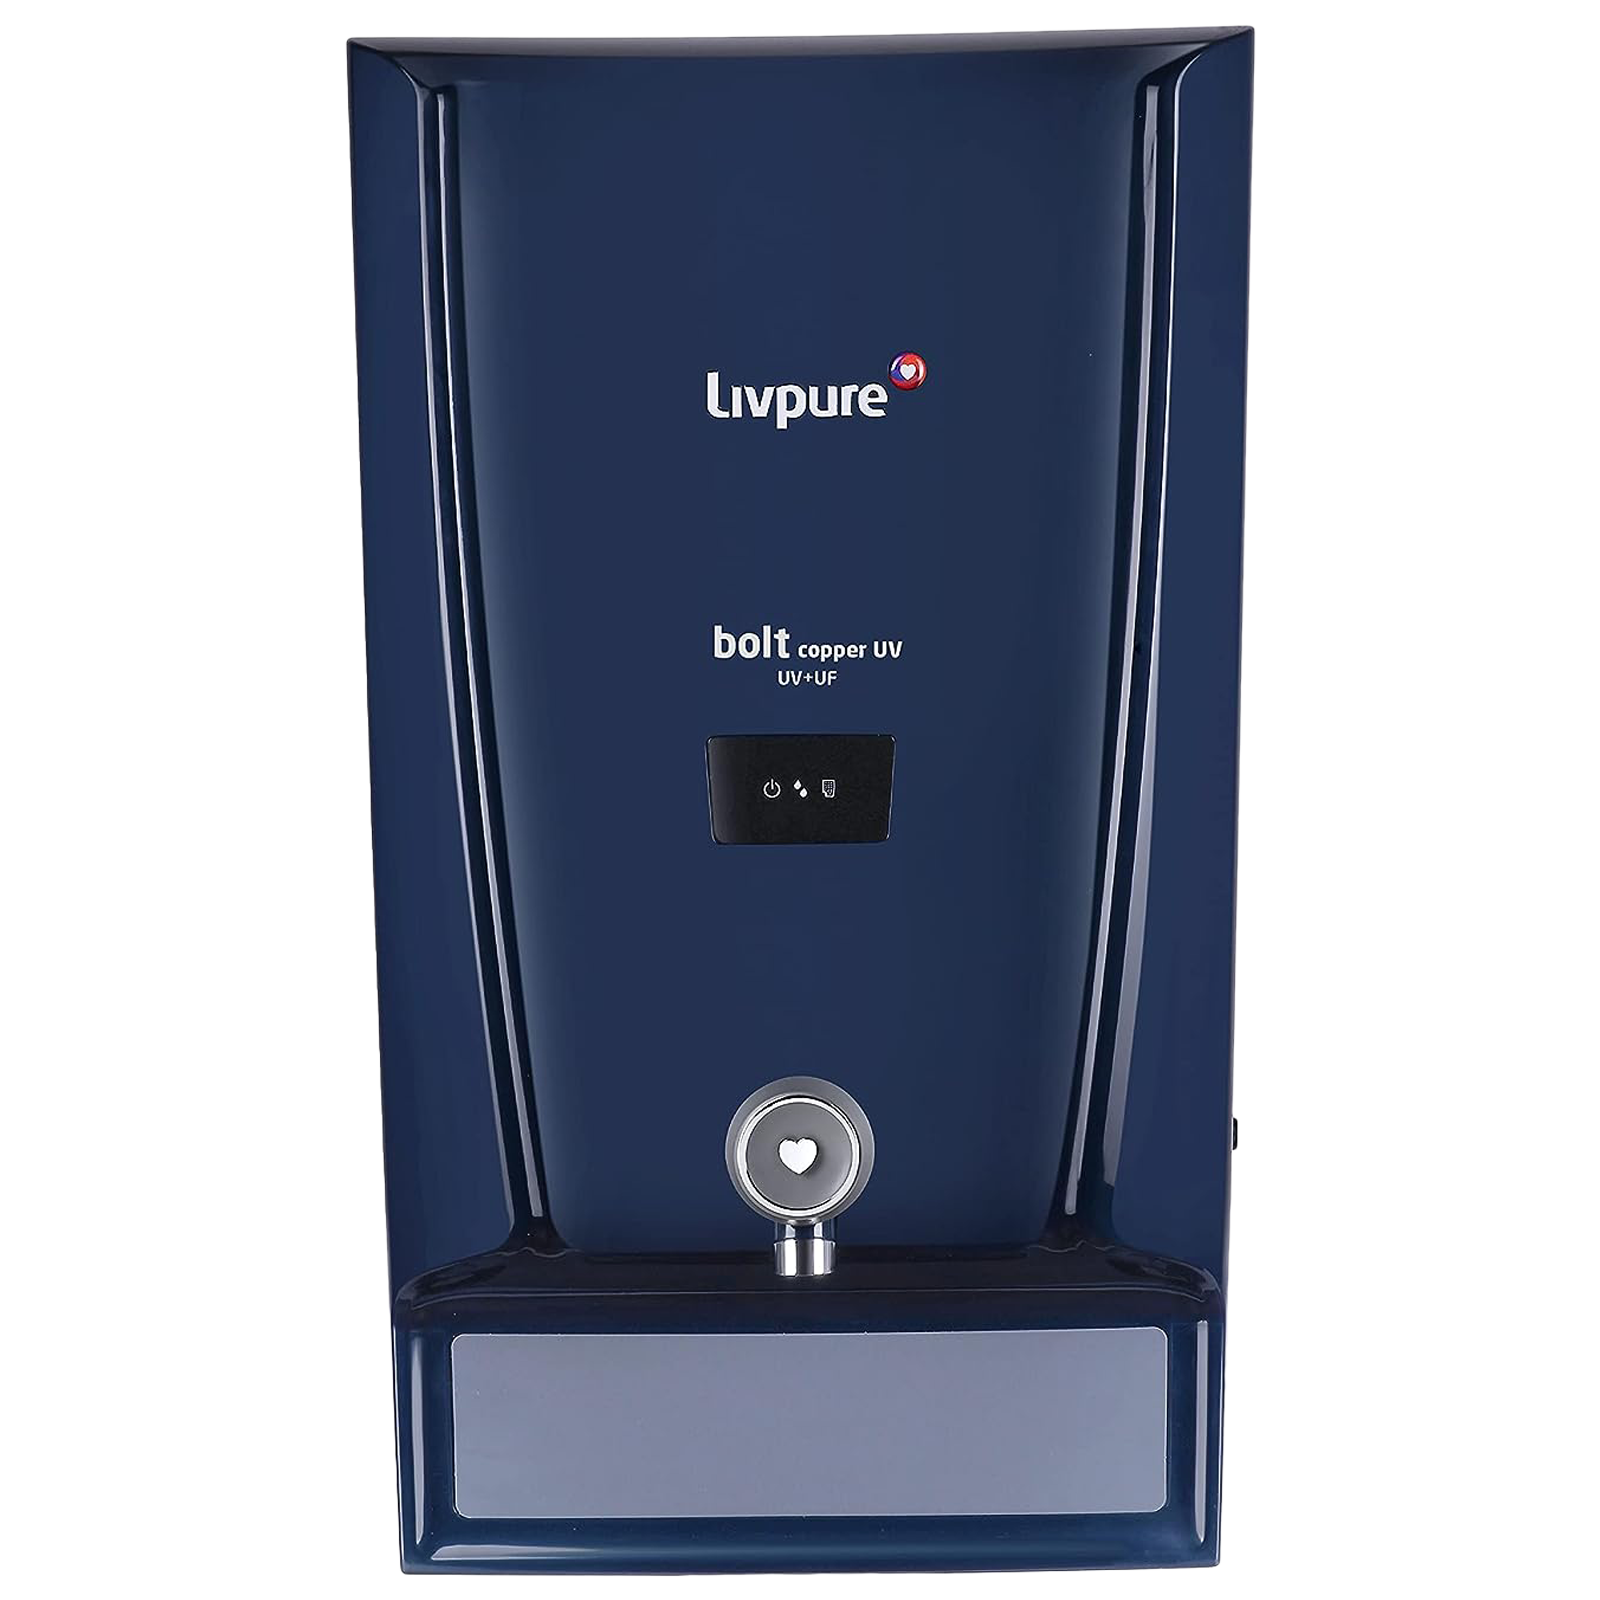 Livpure Bolt Copper 7L UV + UF Water Purifier with Carbon Block Filter (Blue)